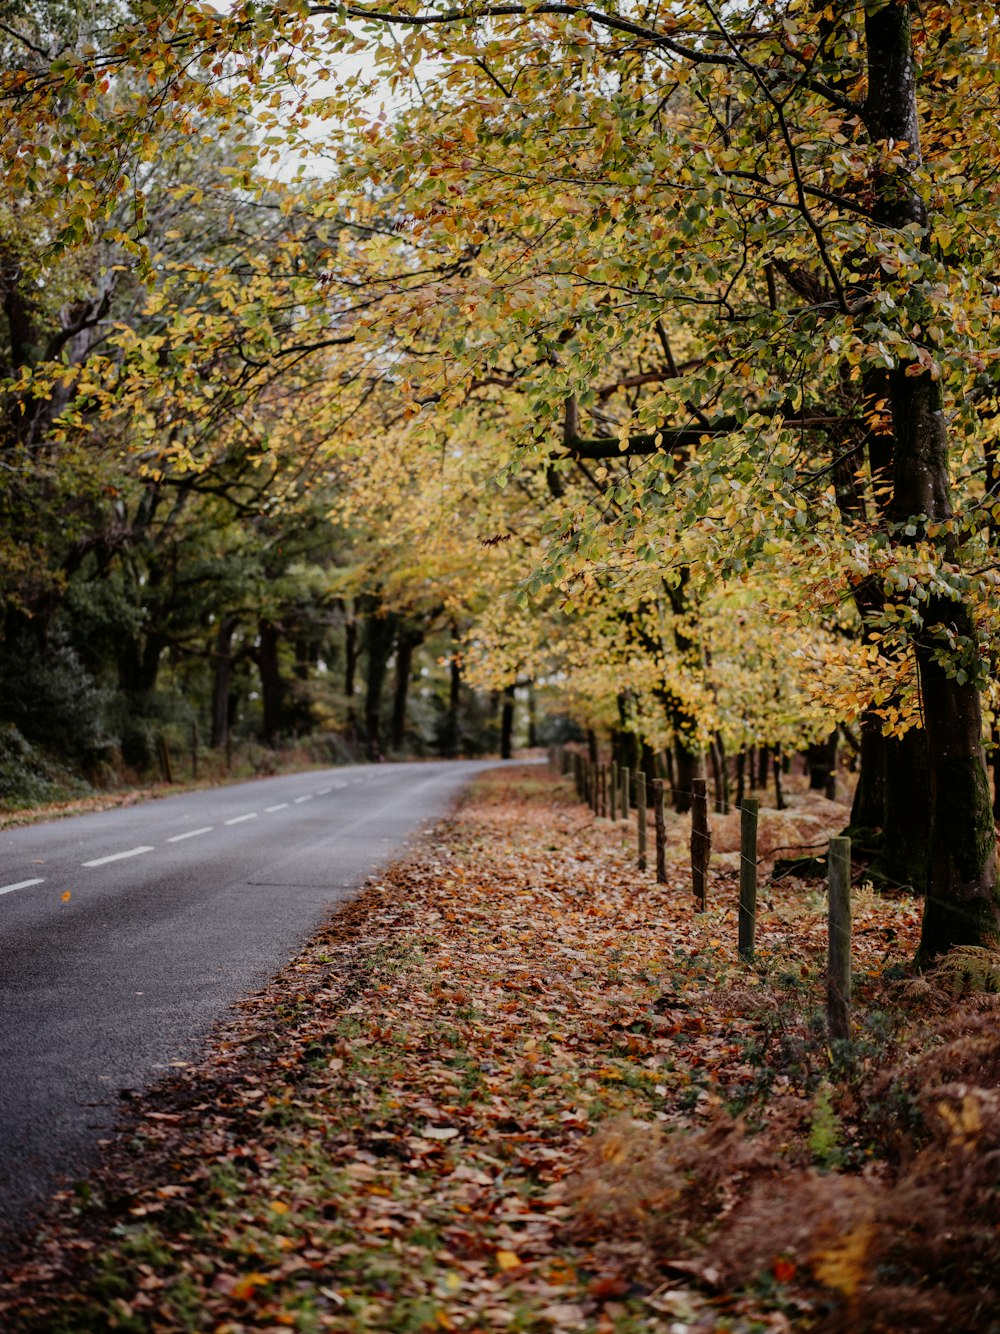 a tree lined road with lots of leaves on the ground